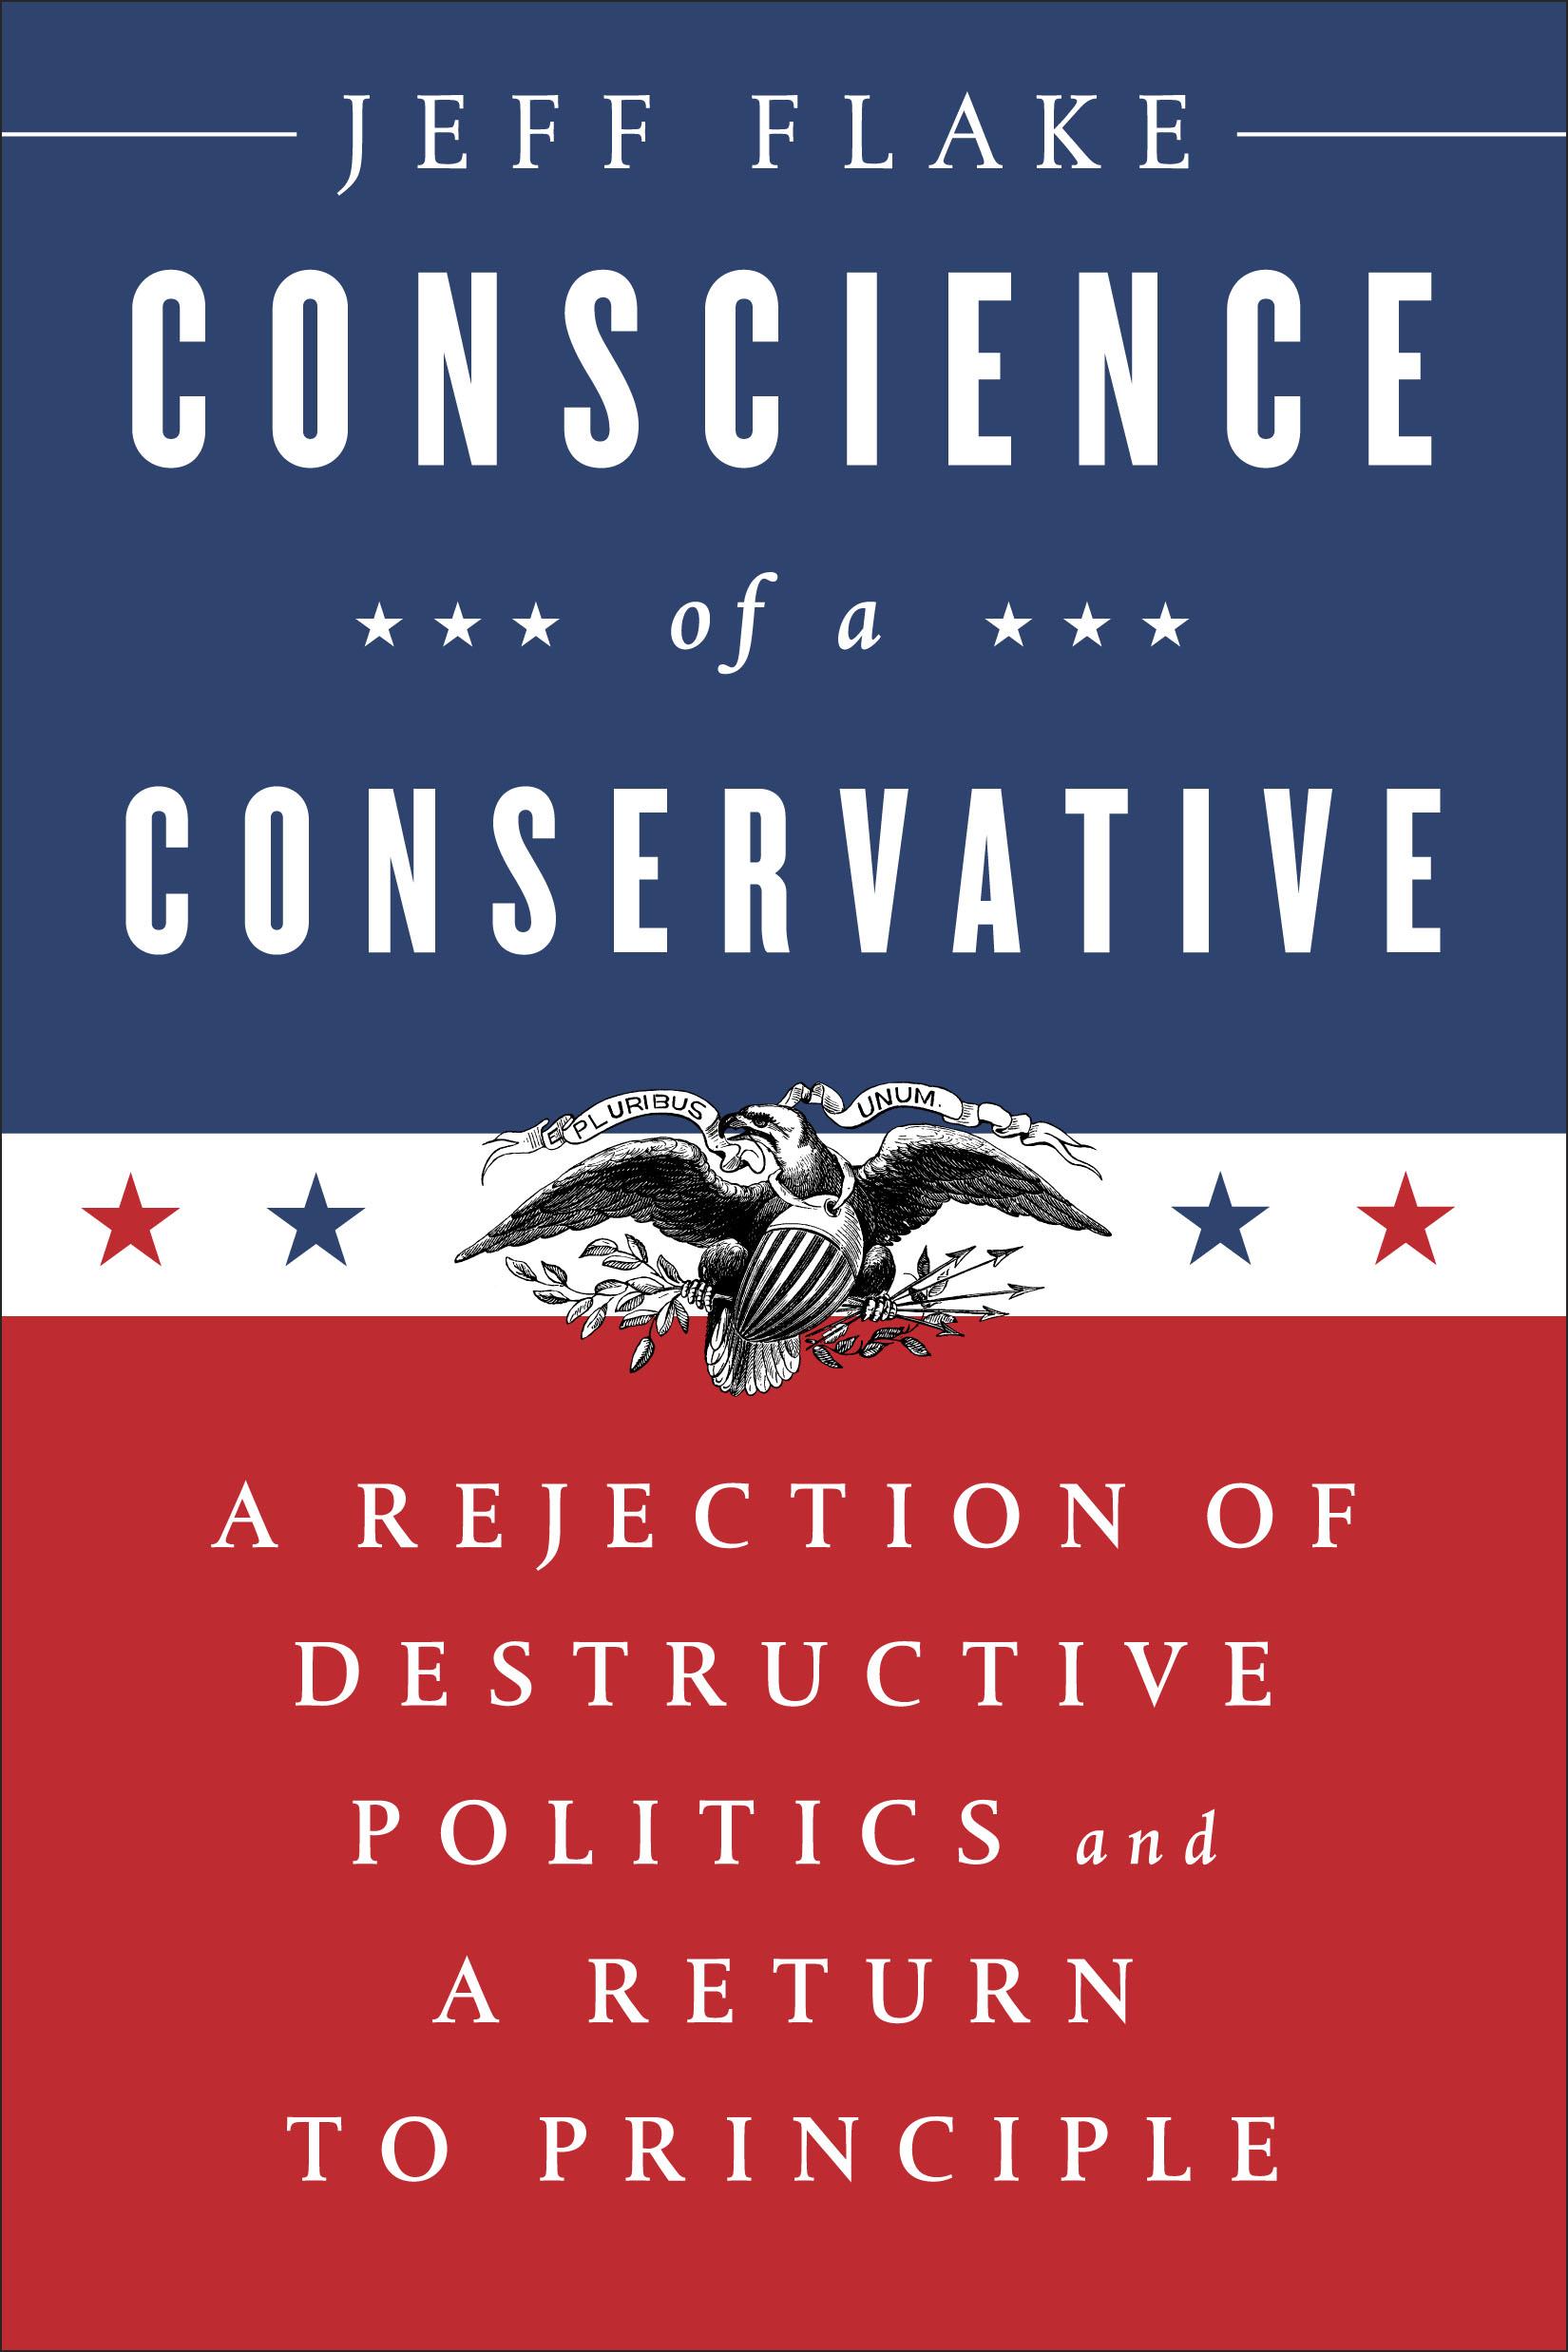 Conscience of a Conservative by Jeff Flake